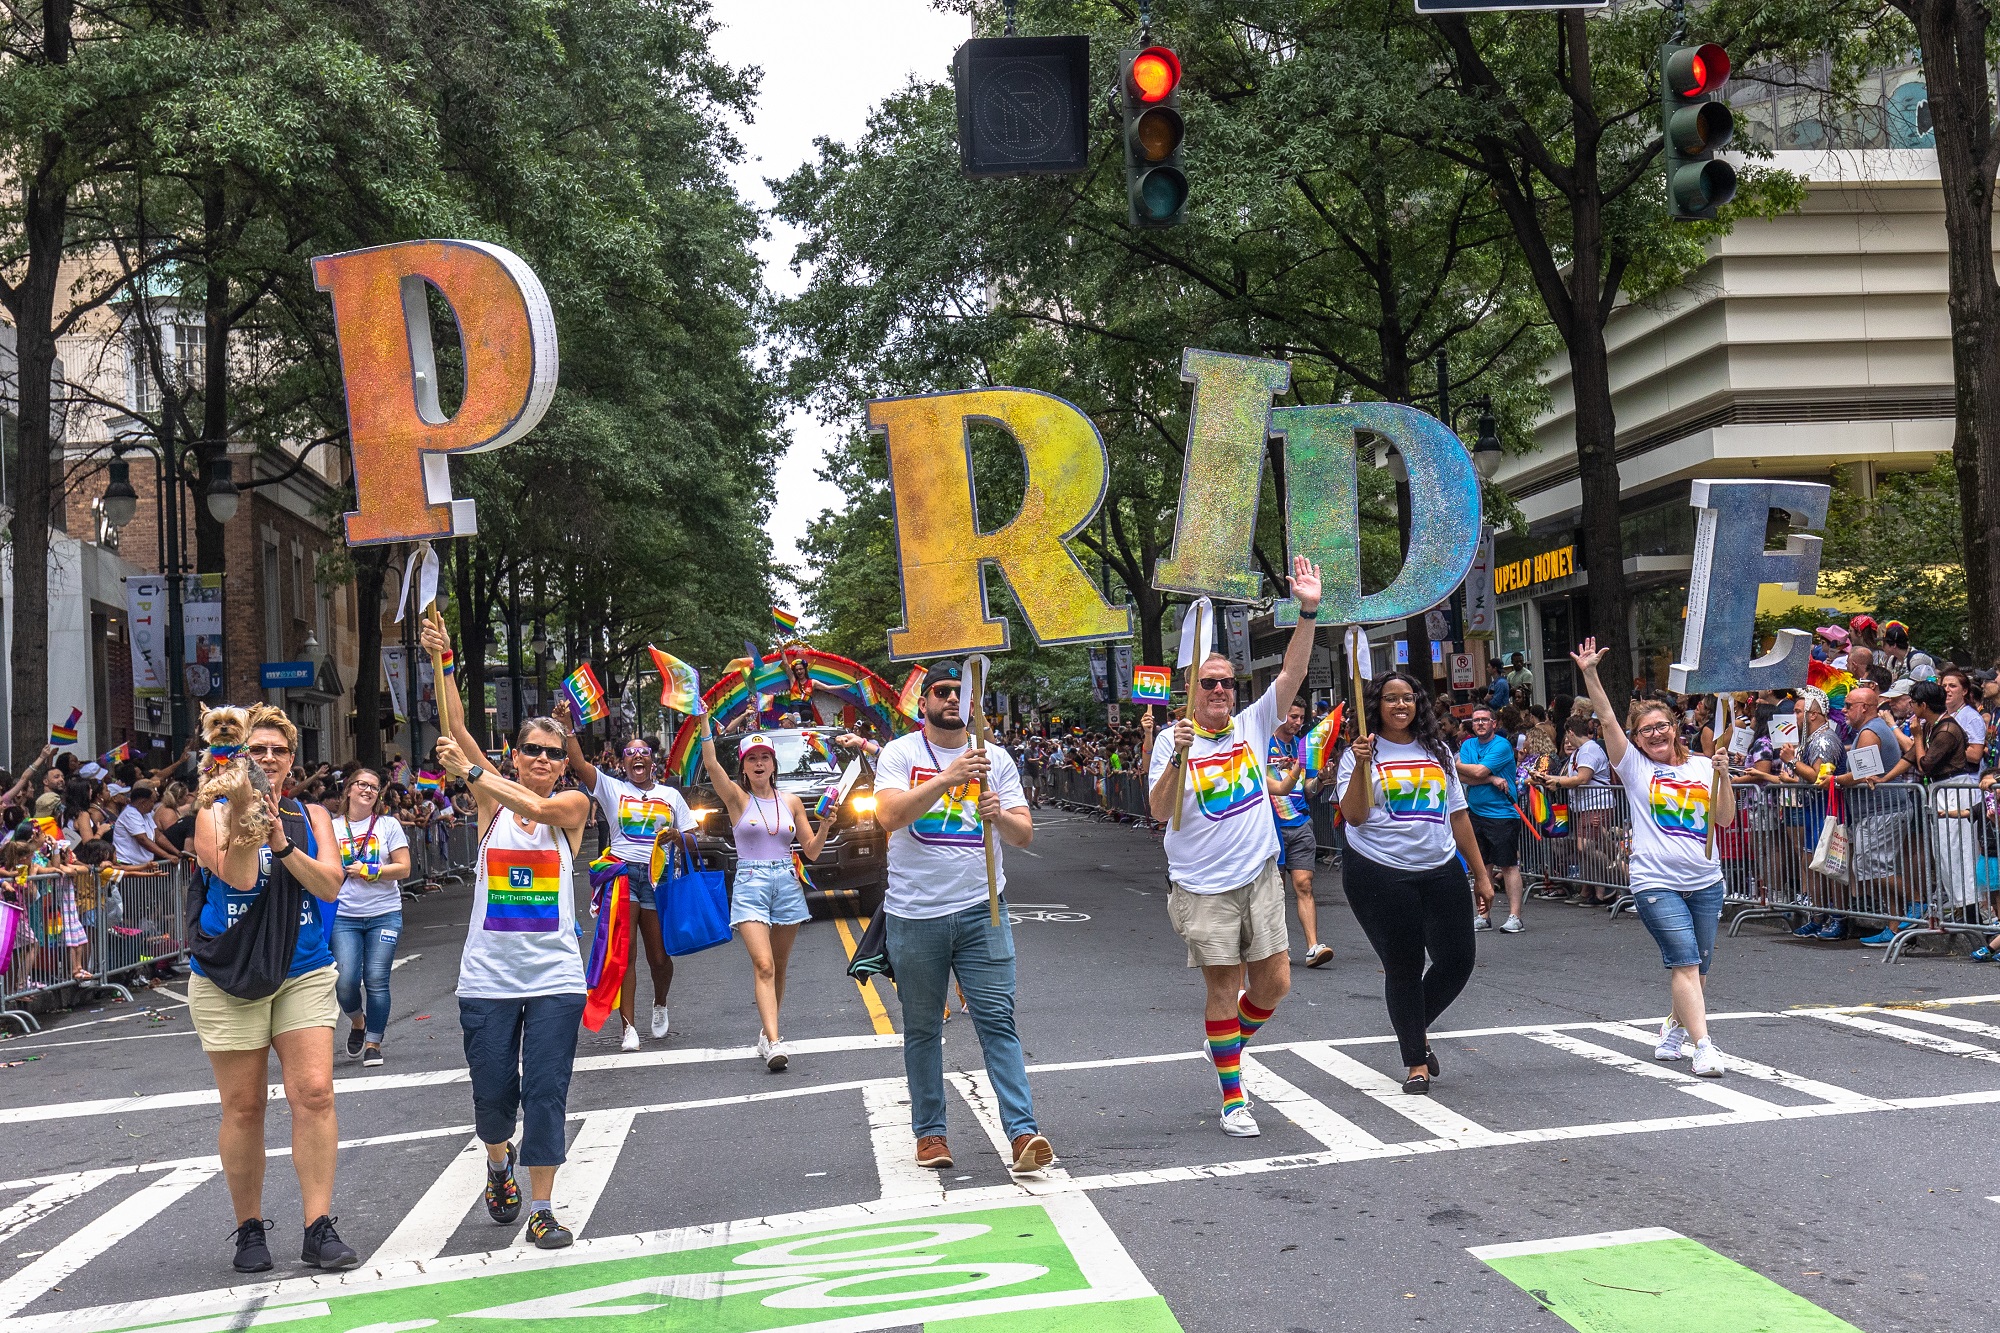 Charlotte Pride Festival And Parade, Uptown Charlotte NC. Sunday, August 21, 2022. Grant Baldwin photo.